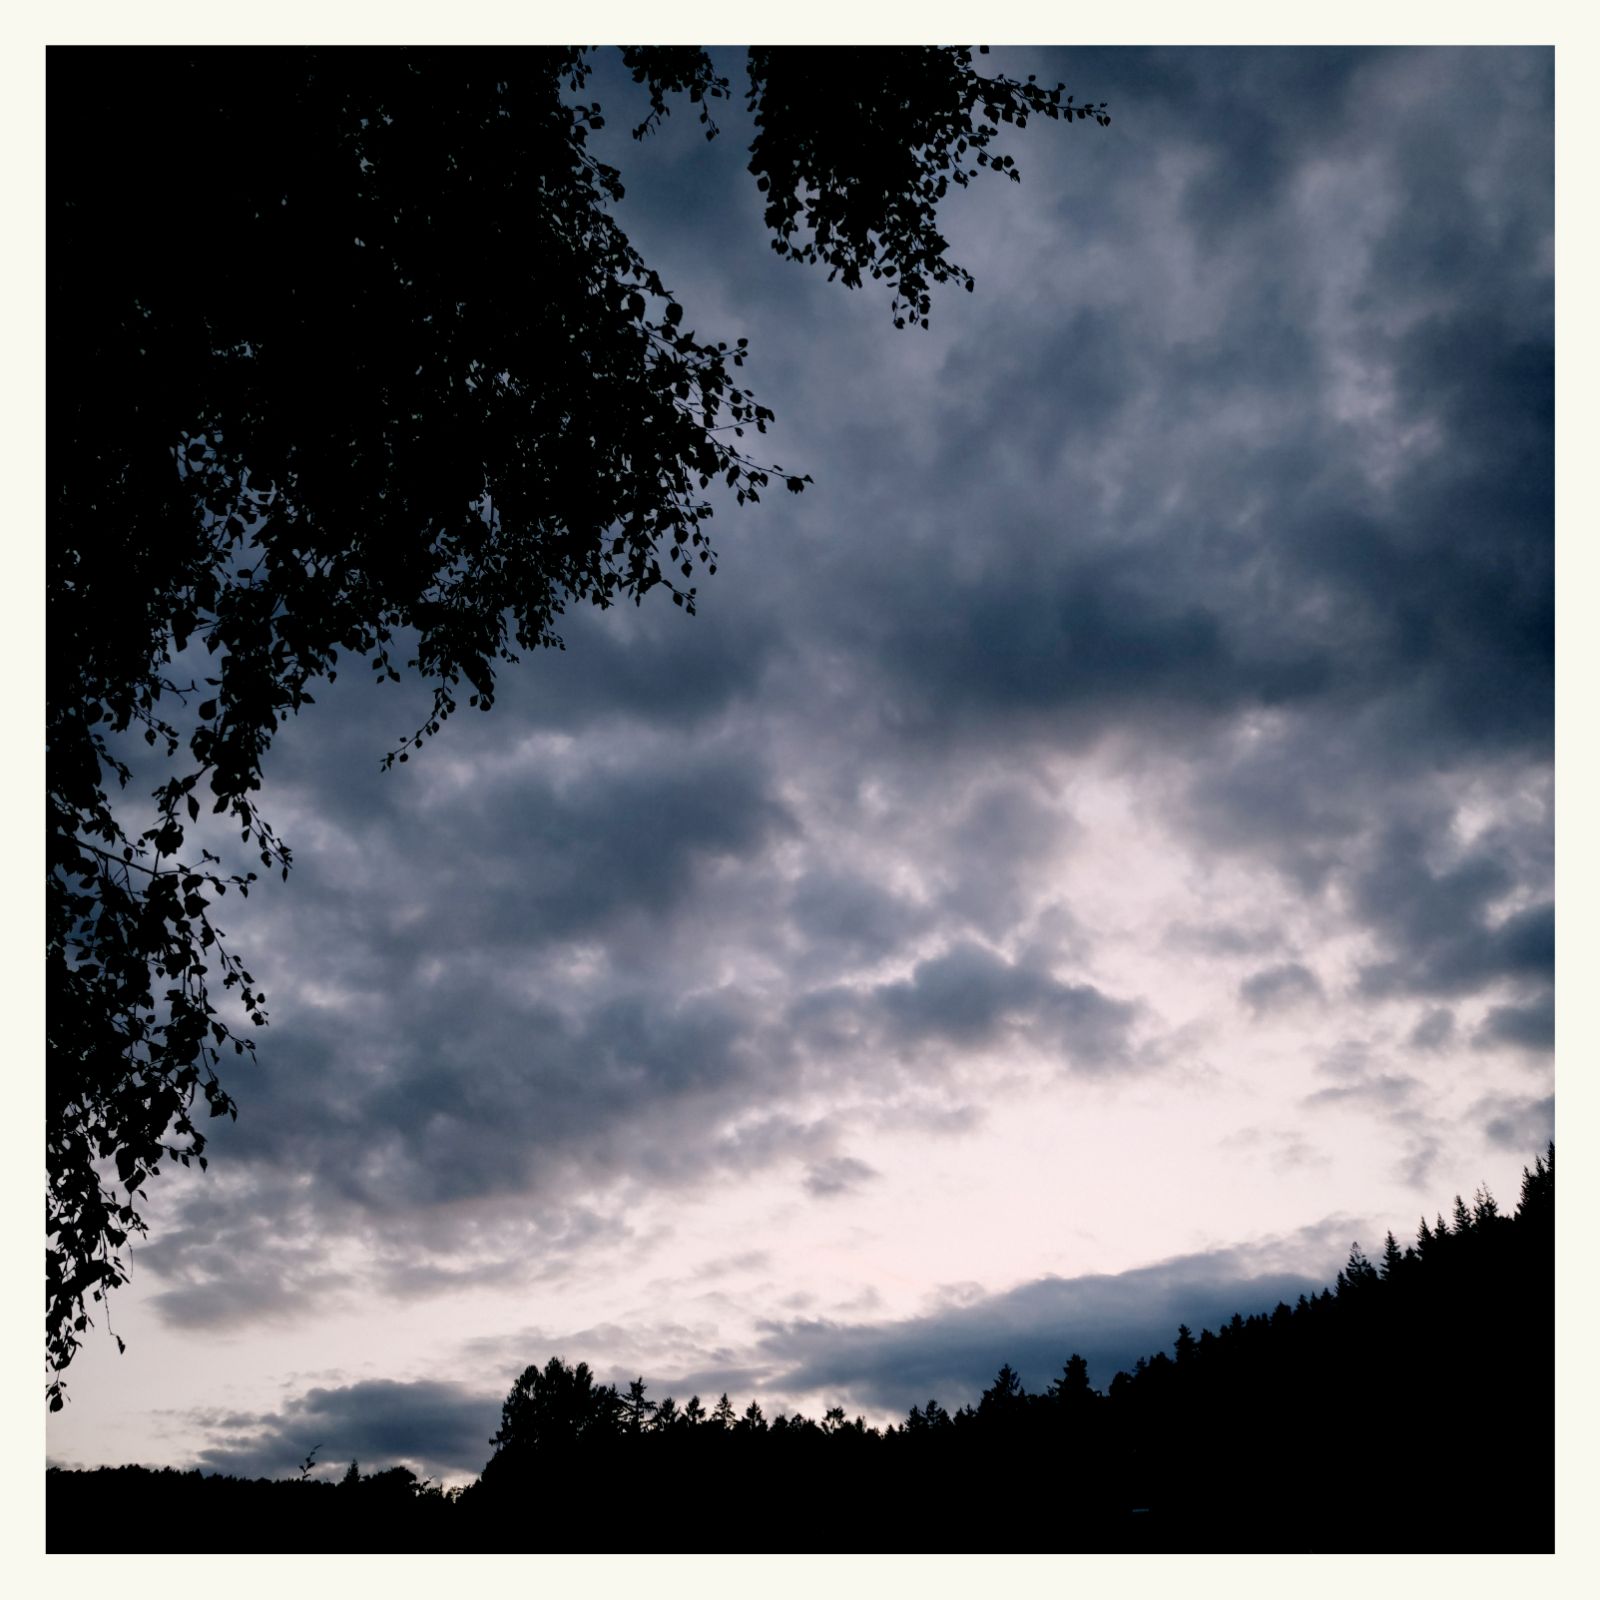 Dusk over Hochwald. Strong contrasts, black trees, white skies.